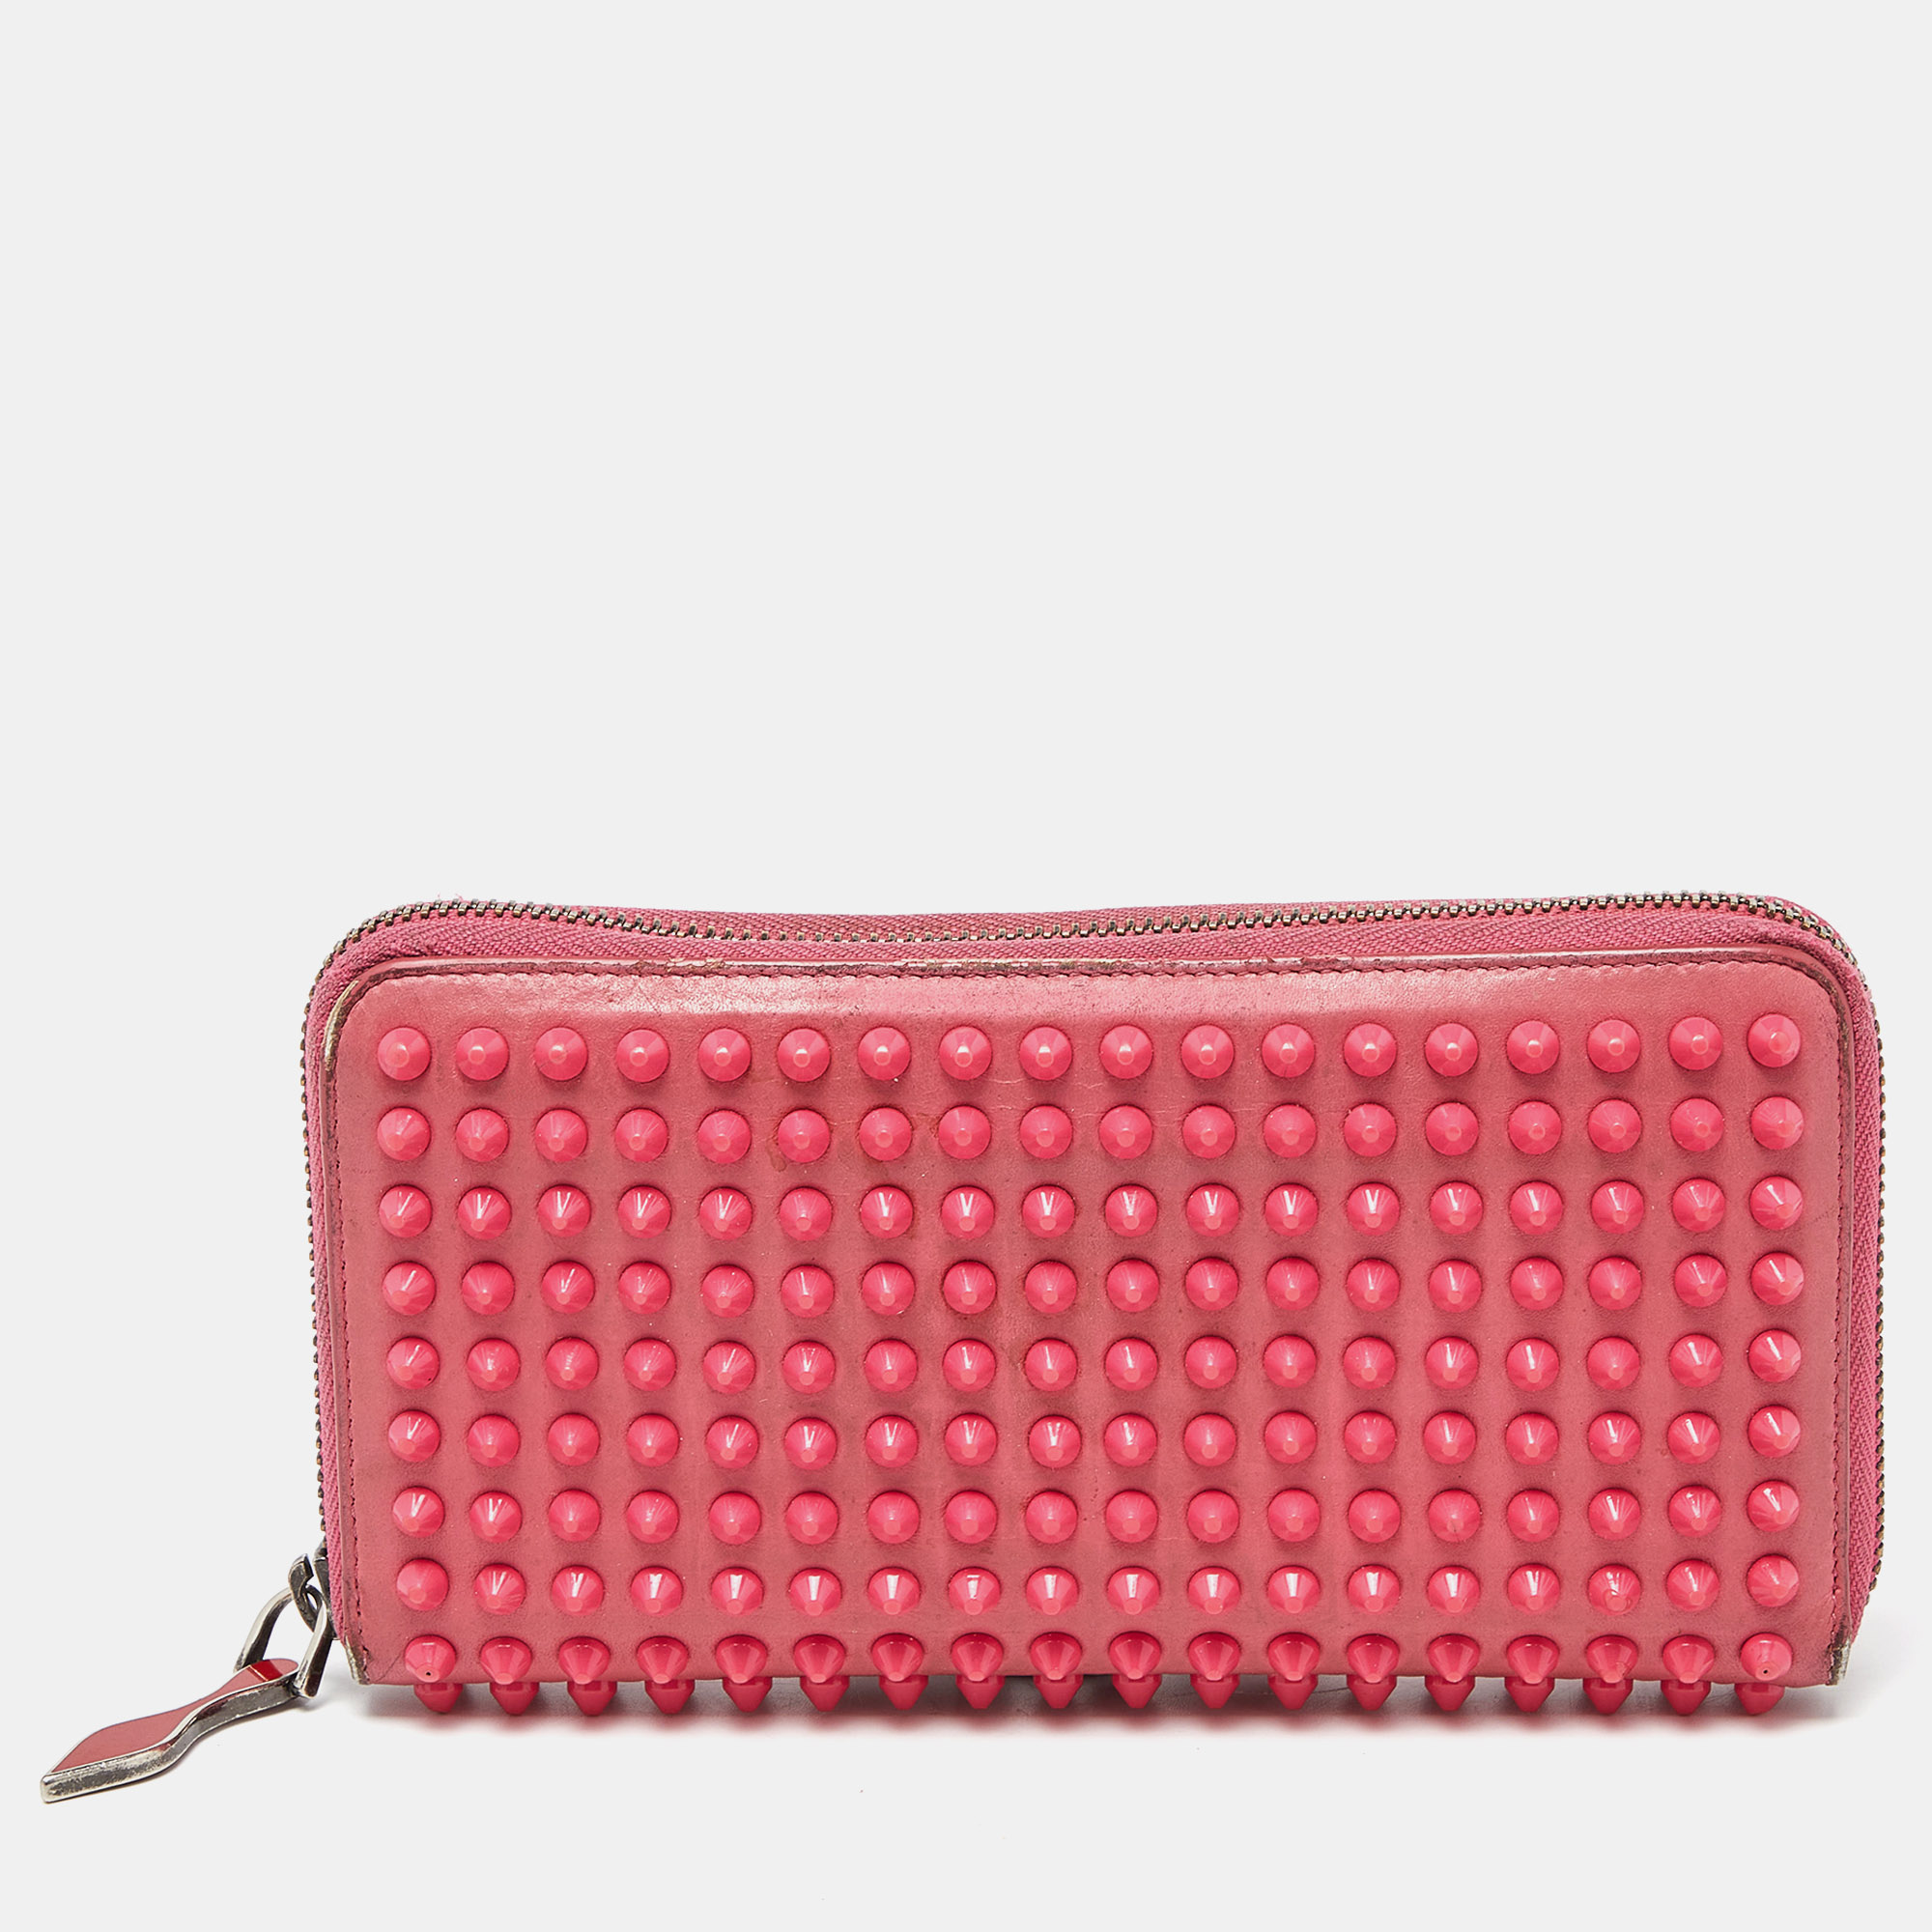 When youre not admiring the beauty of Louboutin heels youve got to get your hands on this stunner of a wallet that is anything but ordinary This pink wallet is crafted from leather and features spikes adorning the exterior. It flaunts a zip around closure that opens to a leather and fabric interior housing a zip pocket open compartments and multiple card slots. It can be carried in hand or else stacked inside a bag.